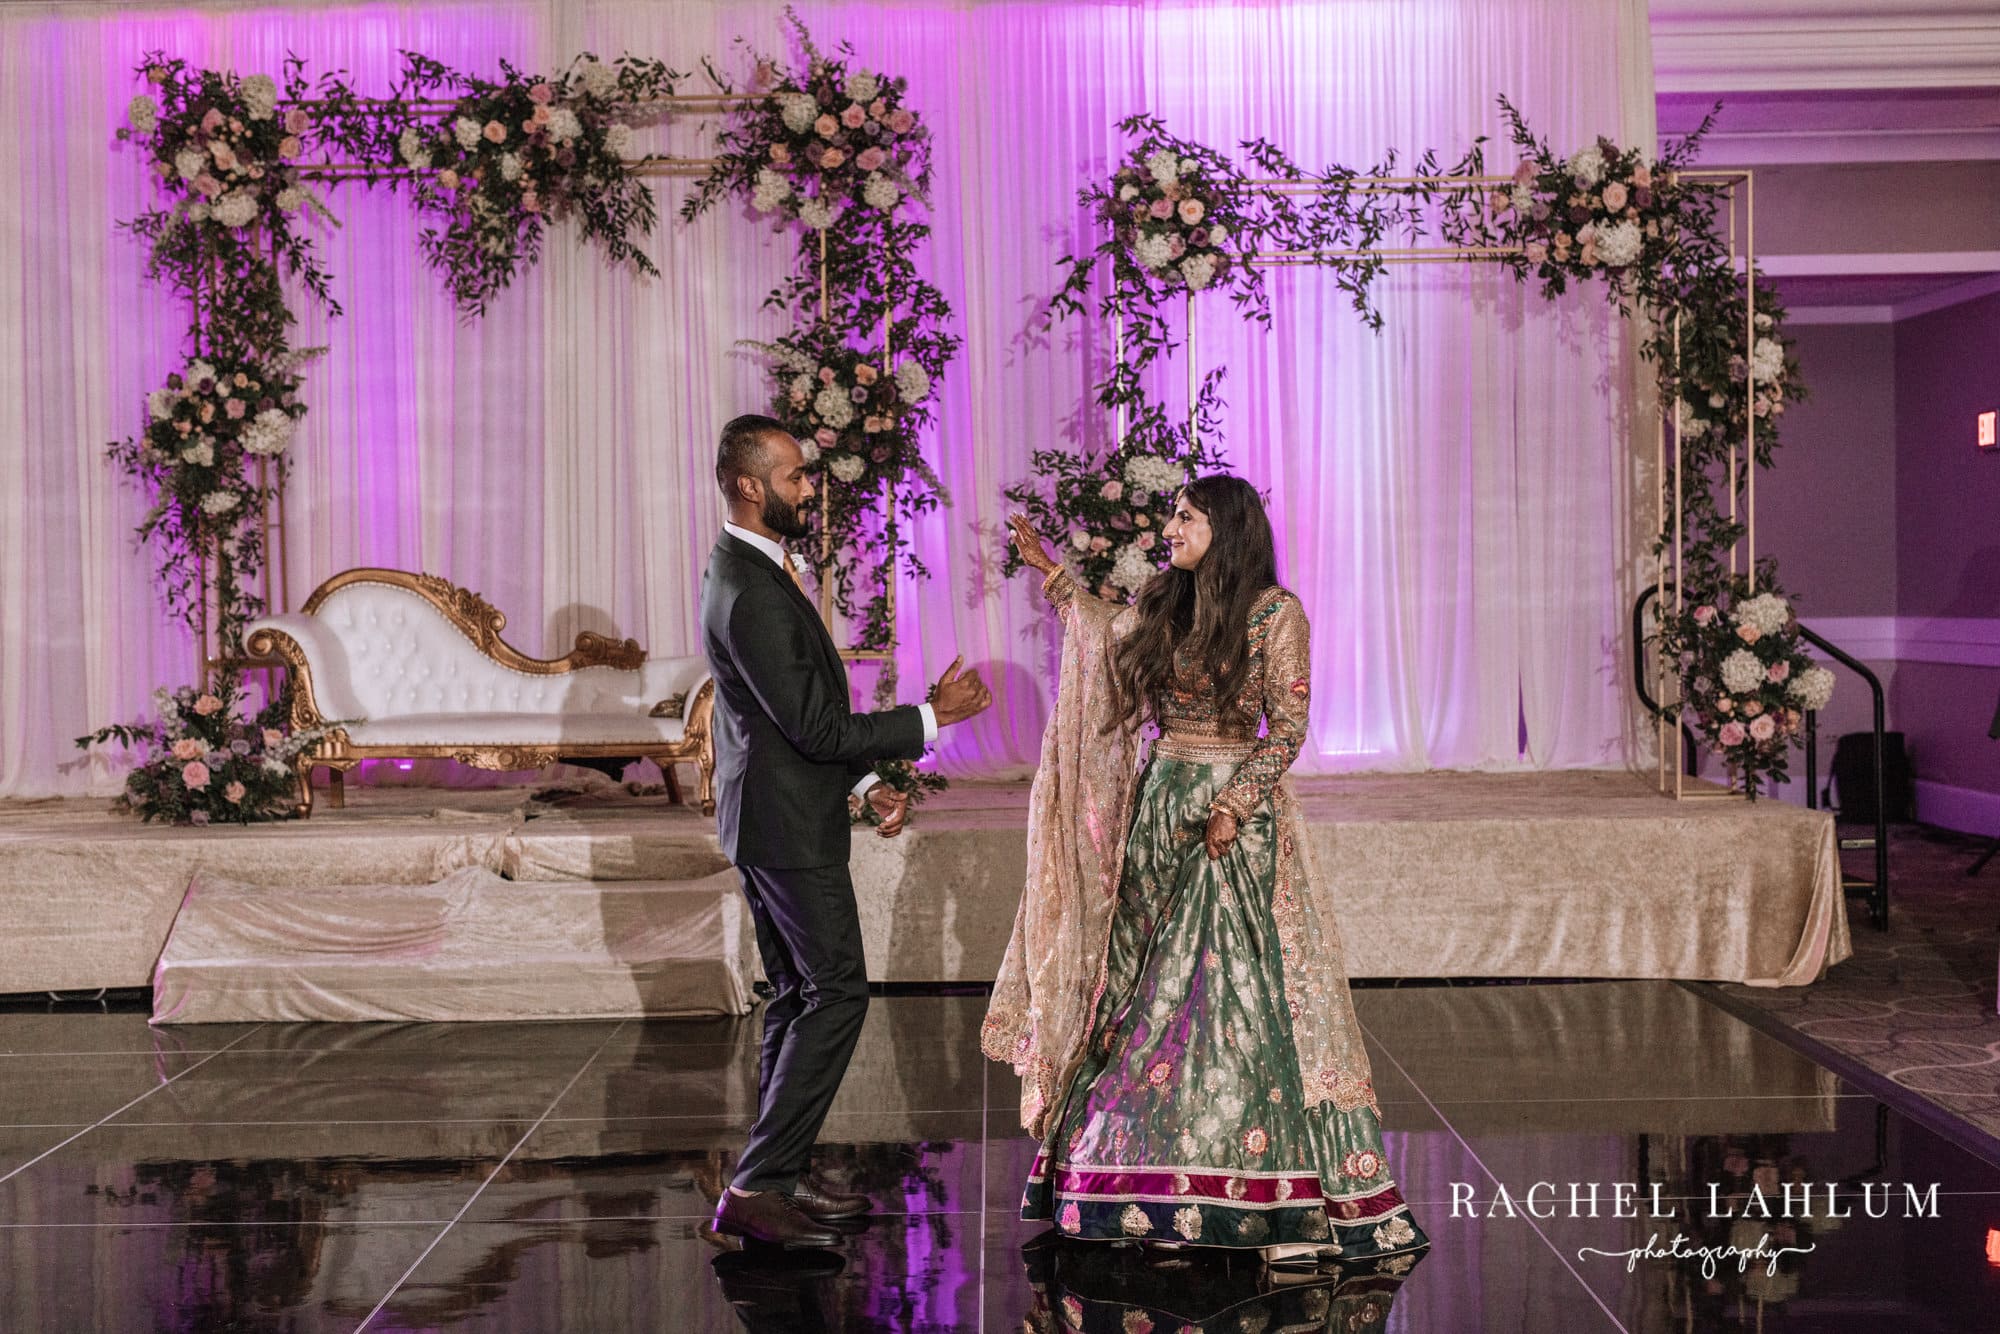 Newlyweds share their first dance during Walima celebration at the Intercontinental.